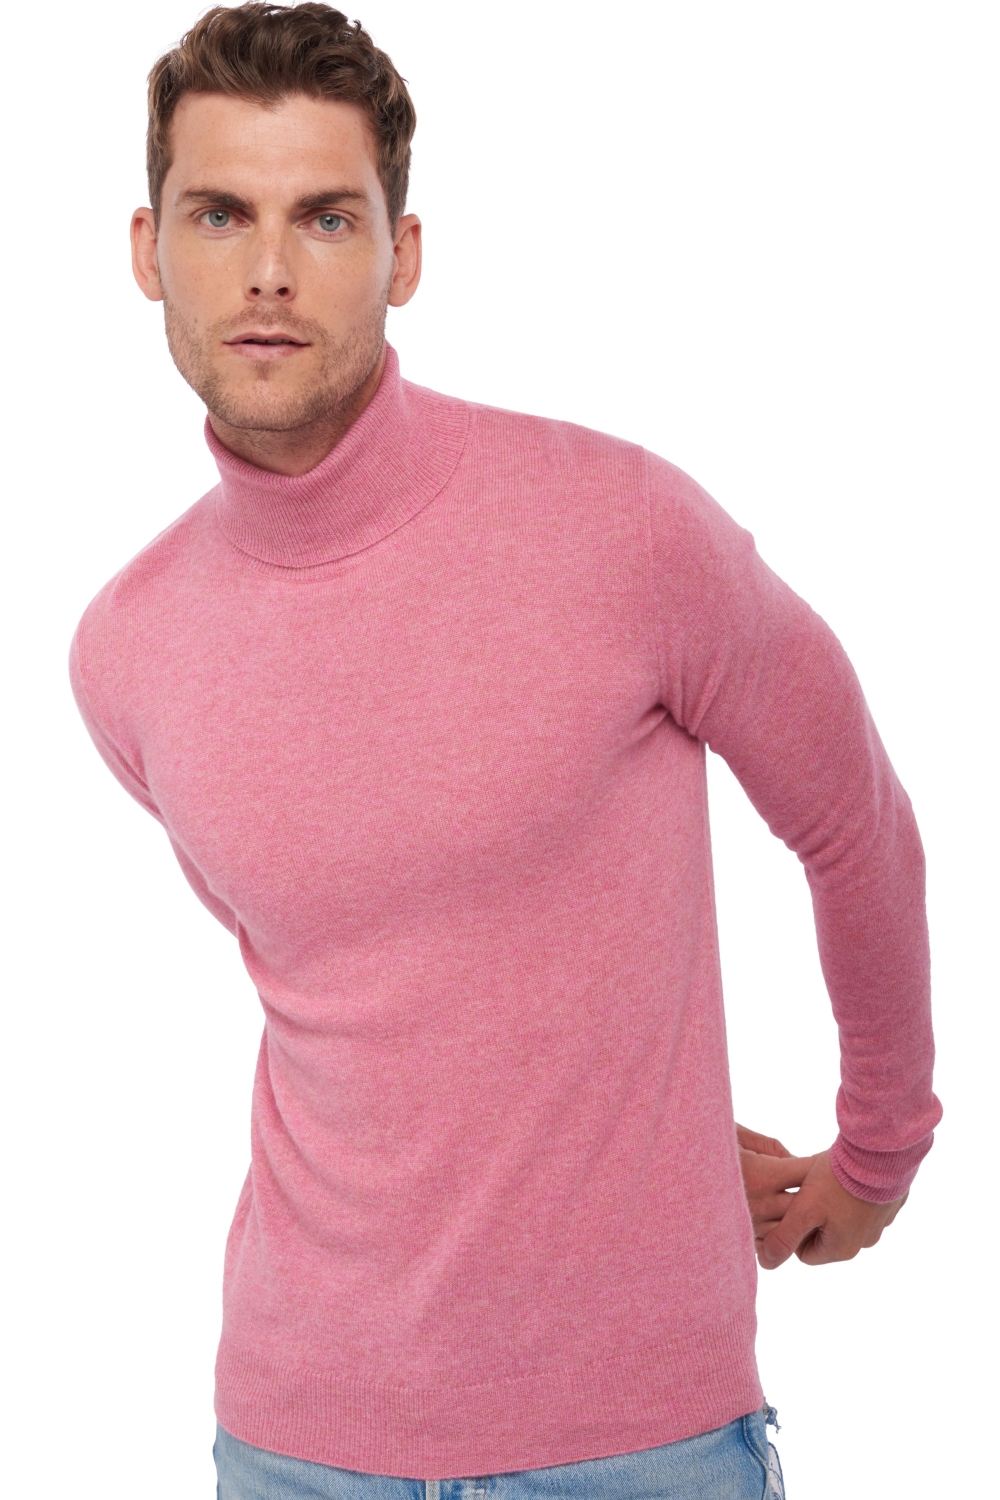 Cachemire pull homme tarry first carnation pink 2xl